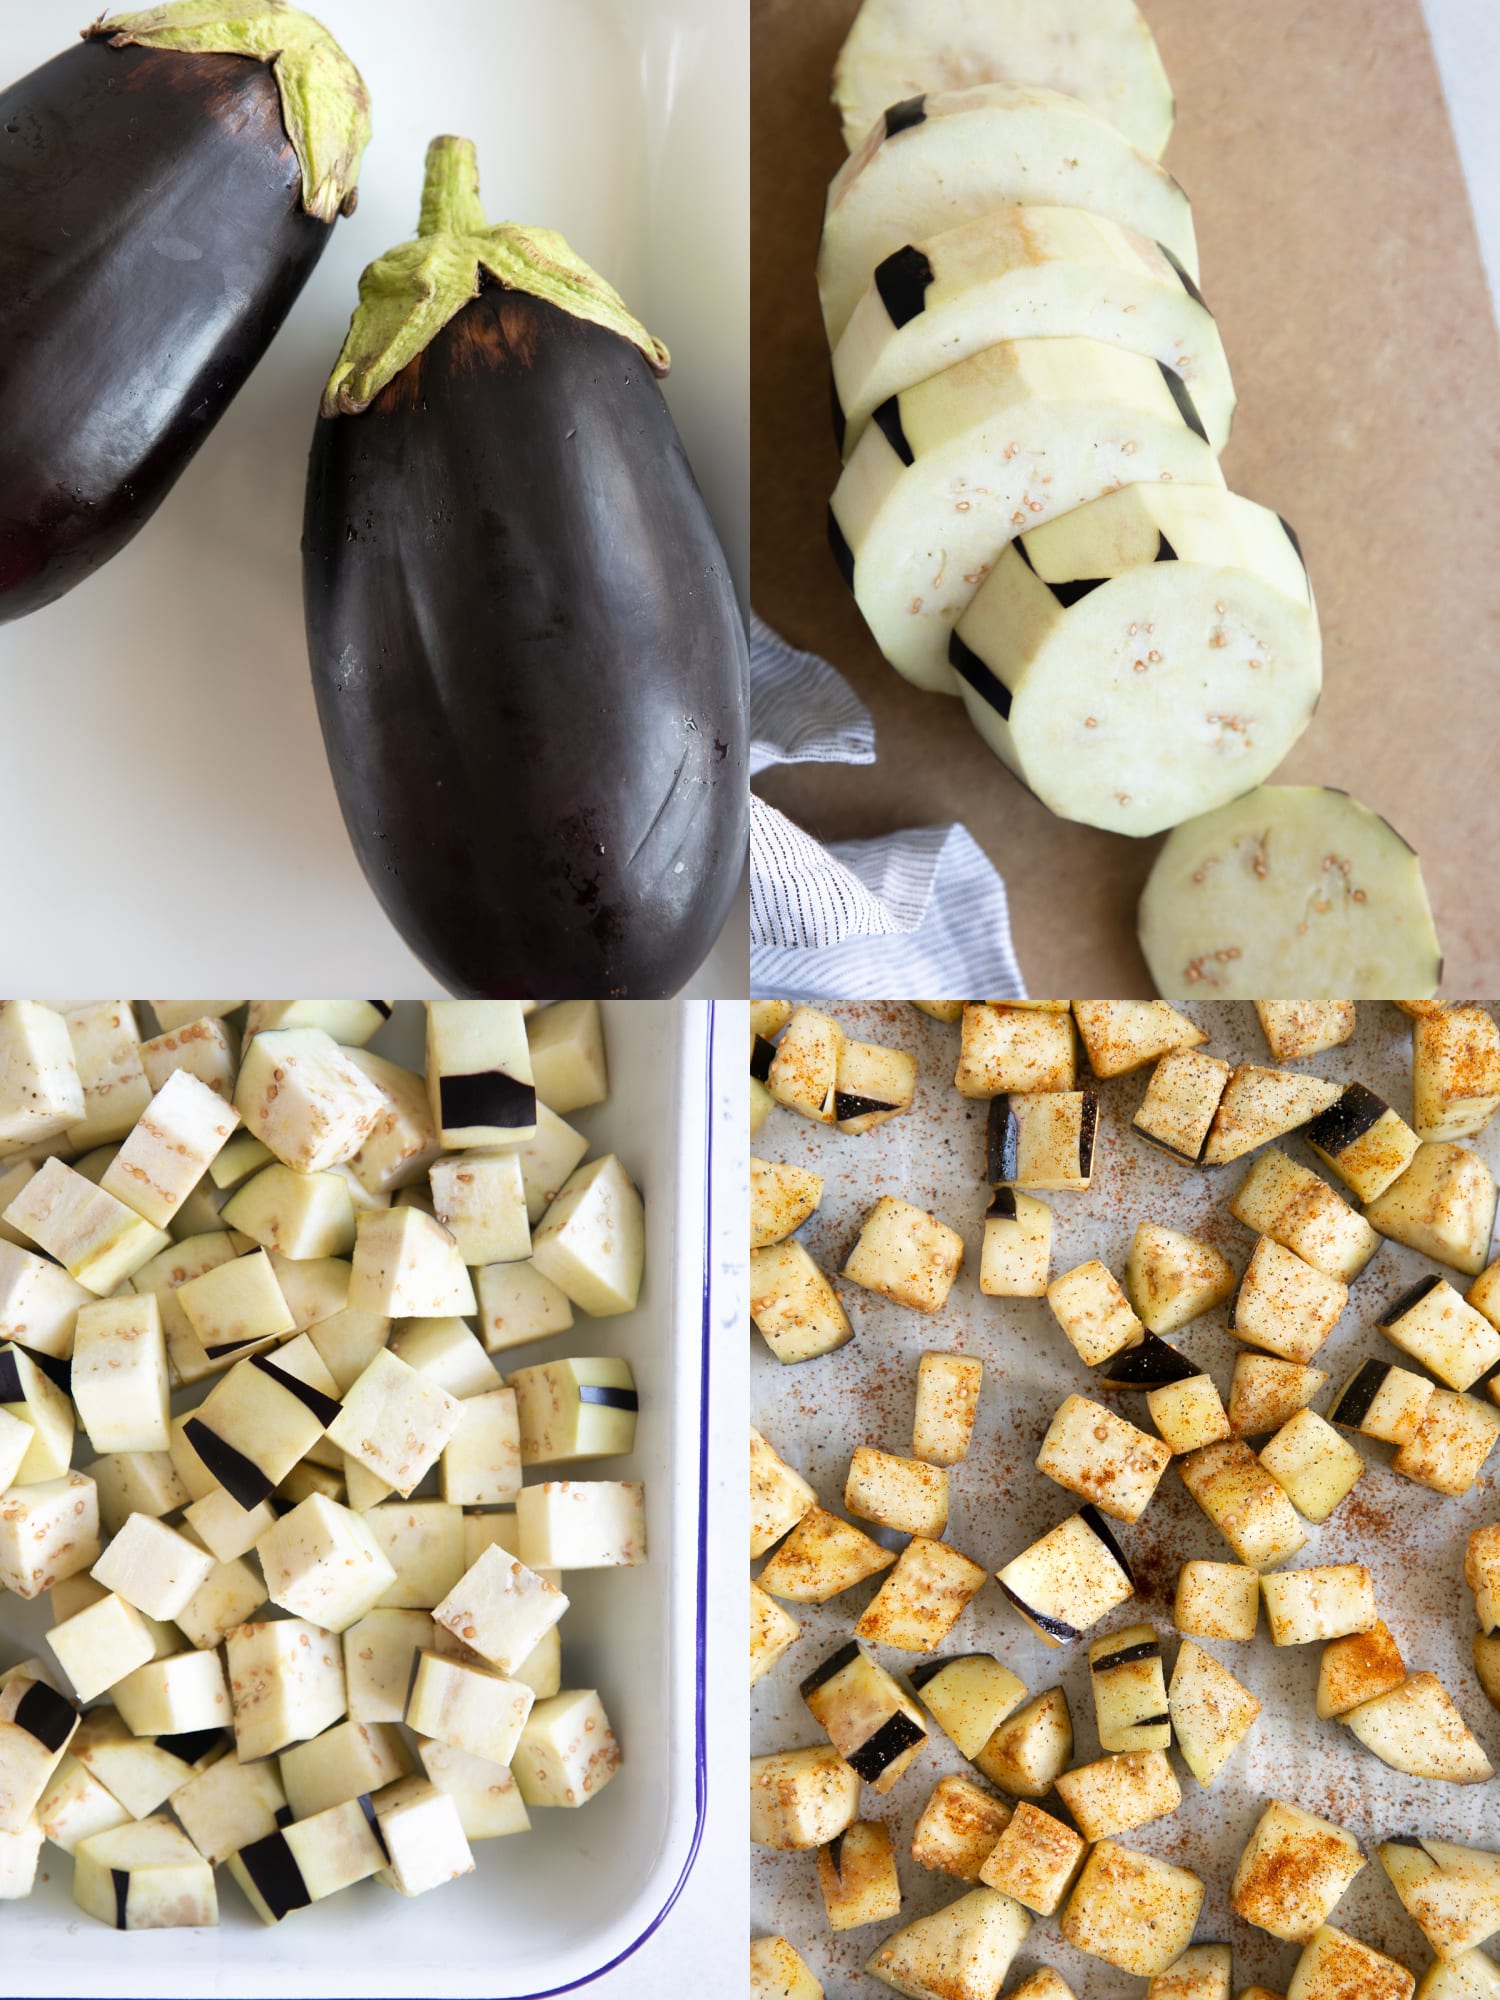 Collage of four images: the first shows 2 whole globe eggplants, the second shows the eggplants sliced into discs, the third shows the eggplant in a large with tray , and the last image shows the eggplant cubes spread over a large baking sheet and seasoned.